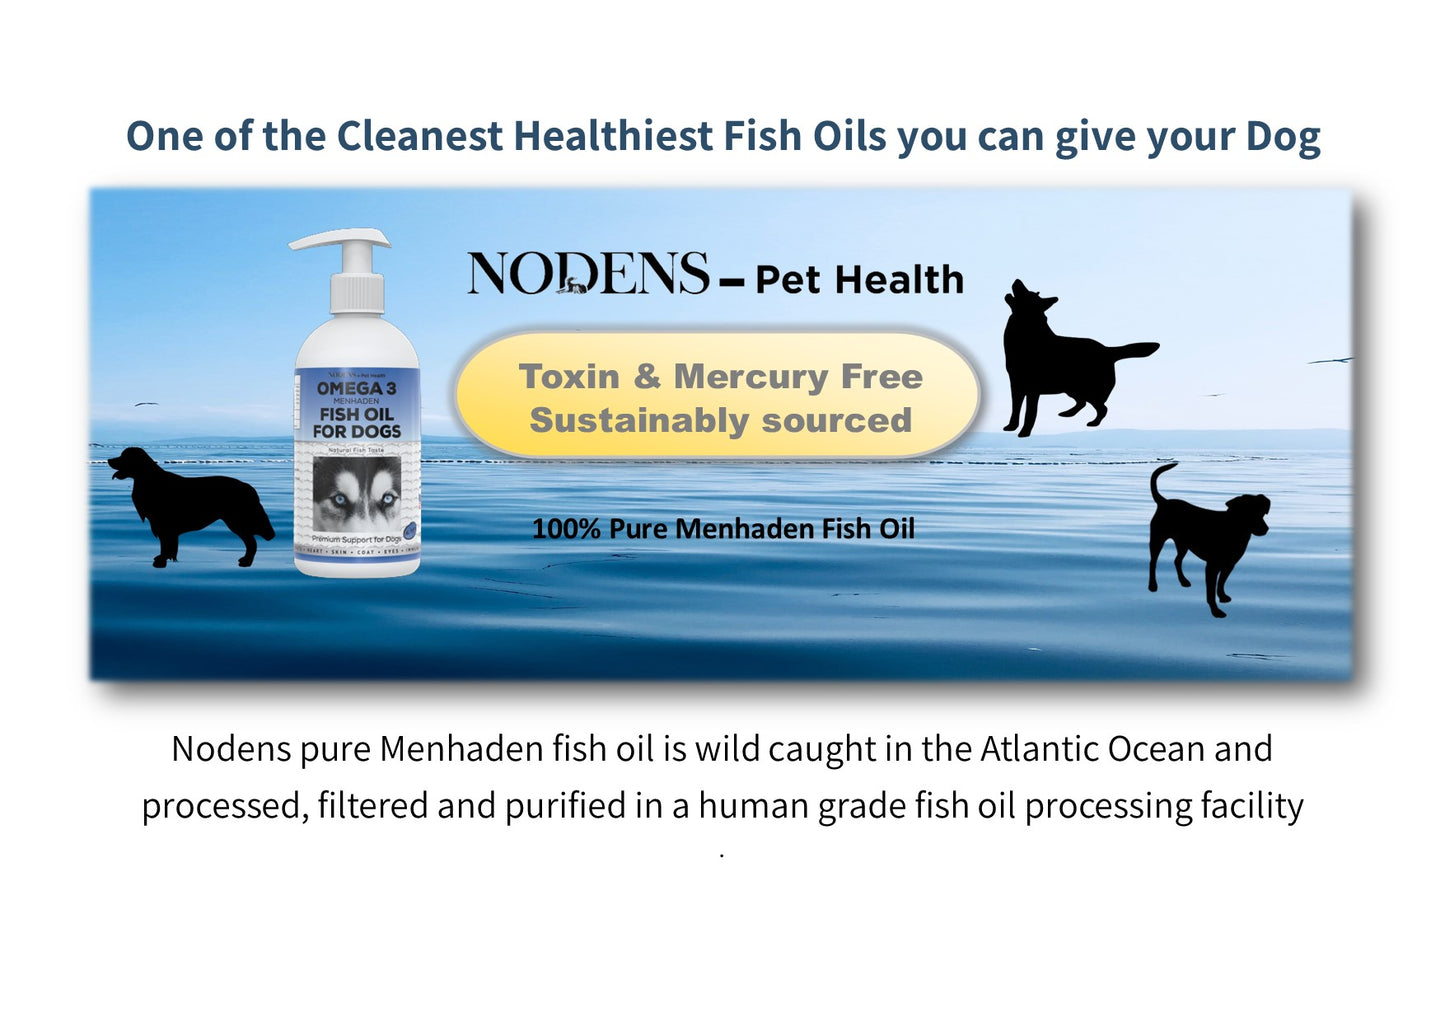 Nodens Omega 3 for Dogs, Natural DPA+EPA+DHA Fatty Acids for healthy skin & shiny coat, improved immunity, joint support, reduced allergies - pure menhaden fish oil for dogs of all ages